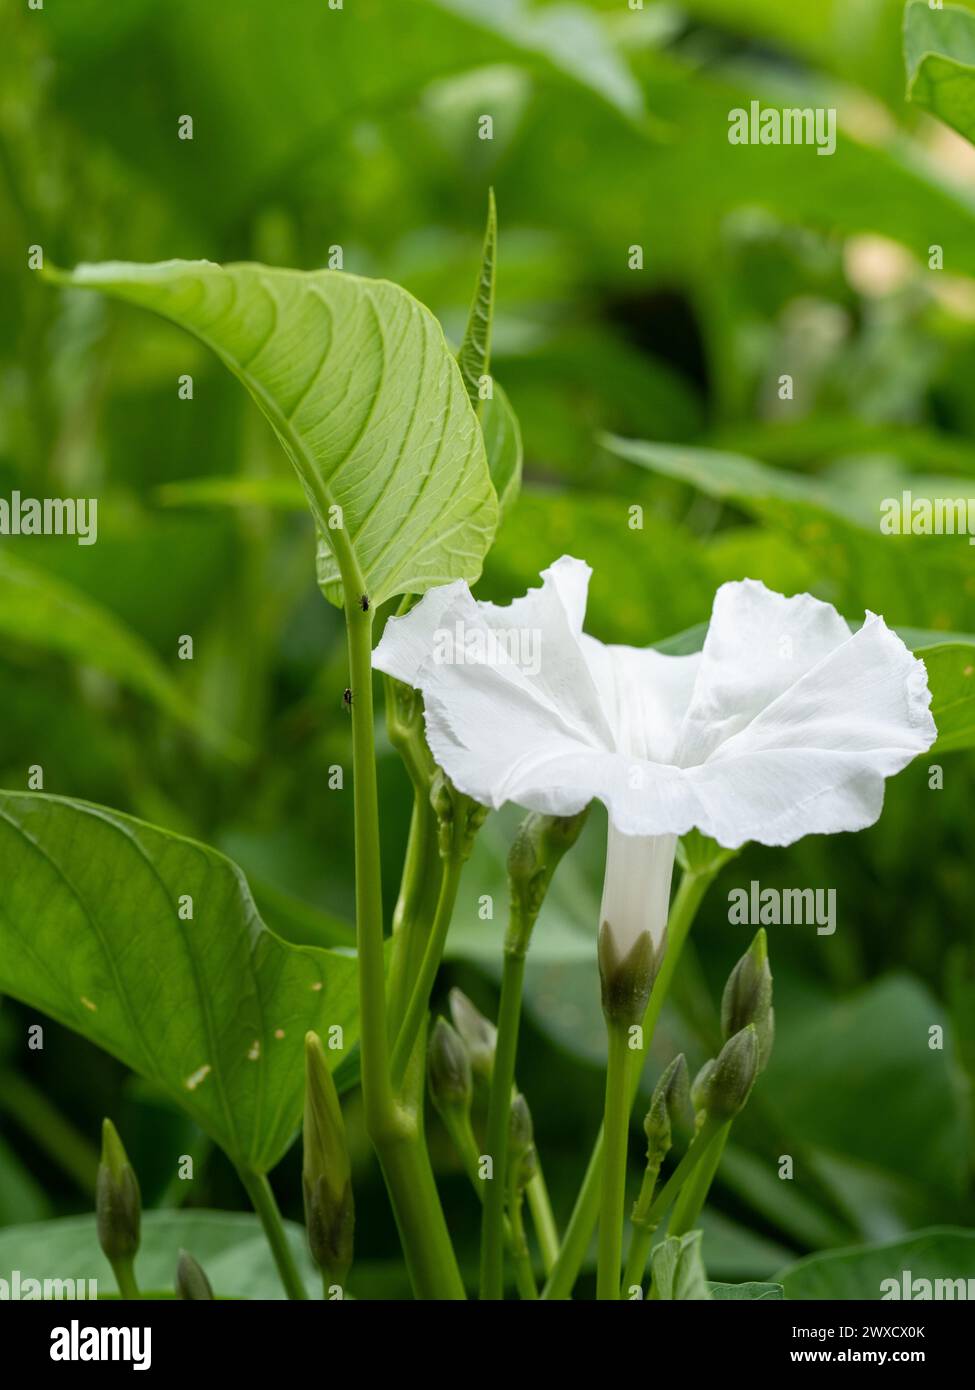 White flower bloom of the green leafy Kangkong or water Spinach growing in a vegetable garden Stock Photo